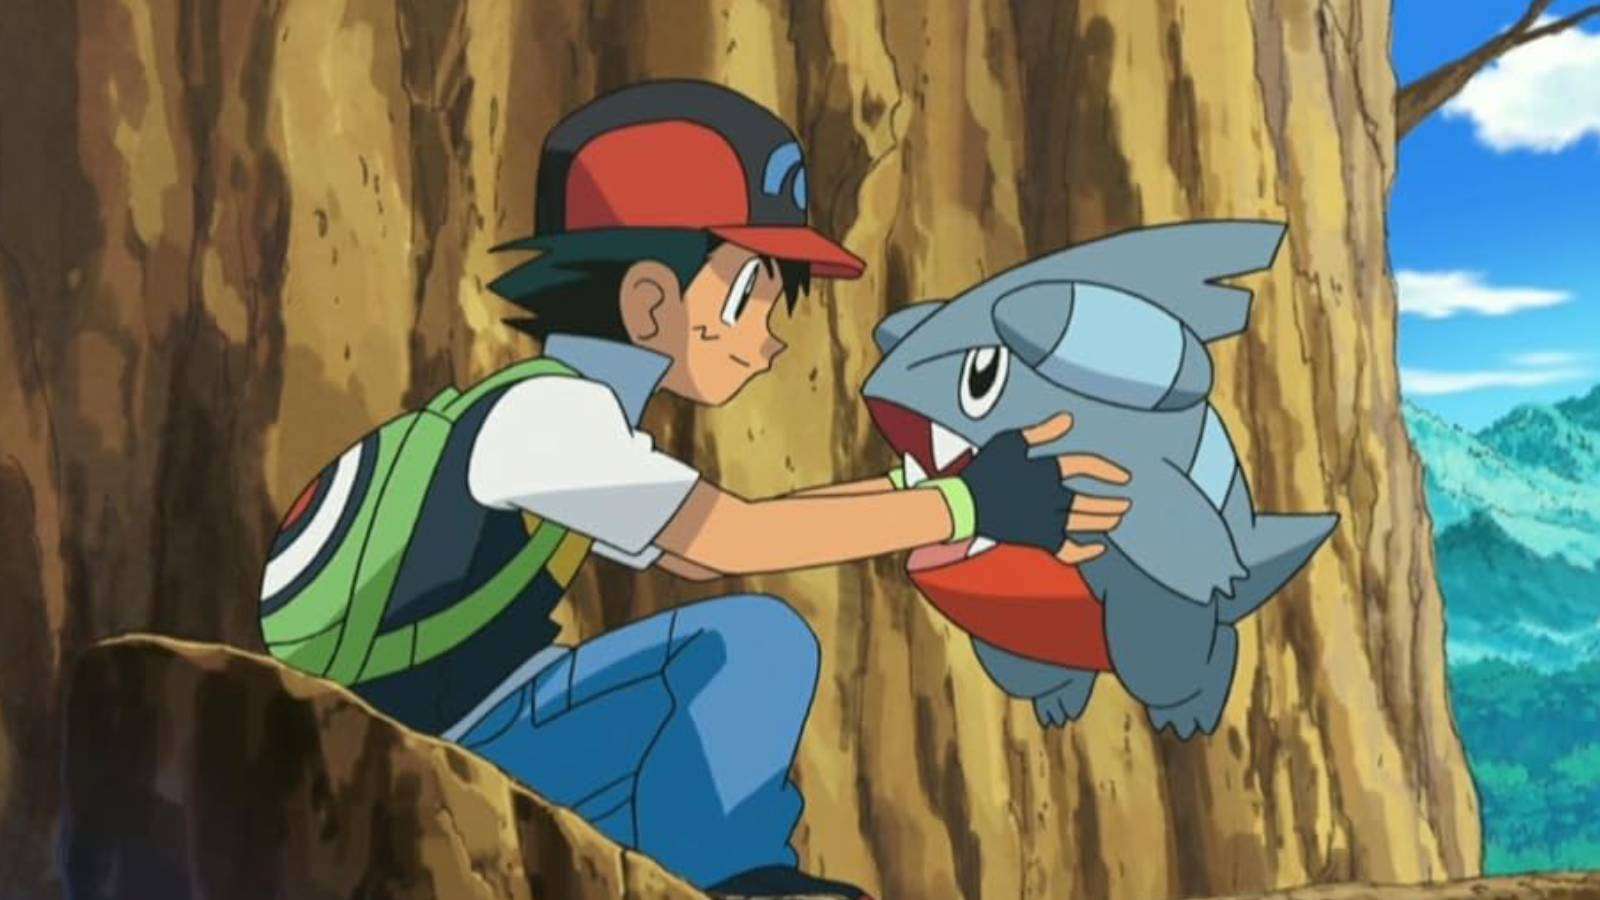 A still from the Pokemon anime shows Ask Ketchum holding up the Pokemon Gible